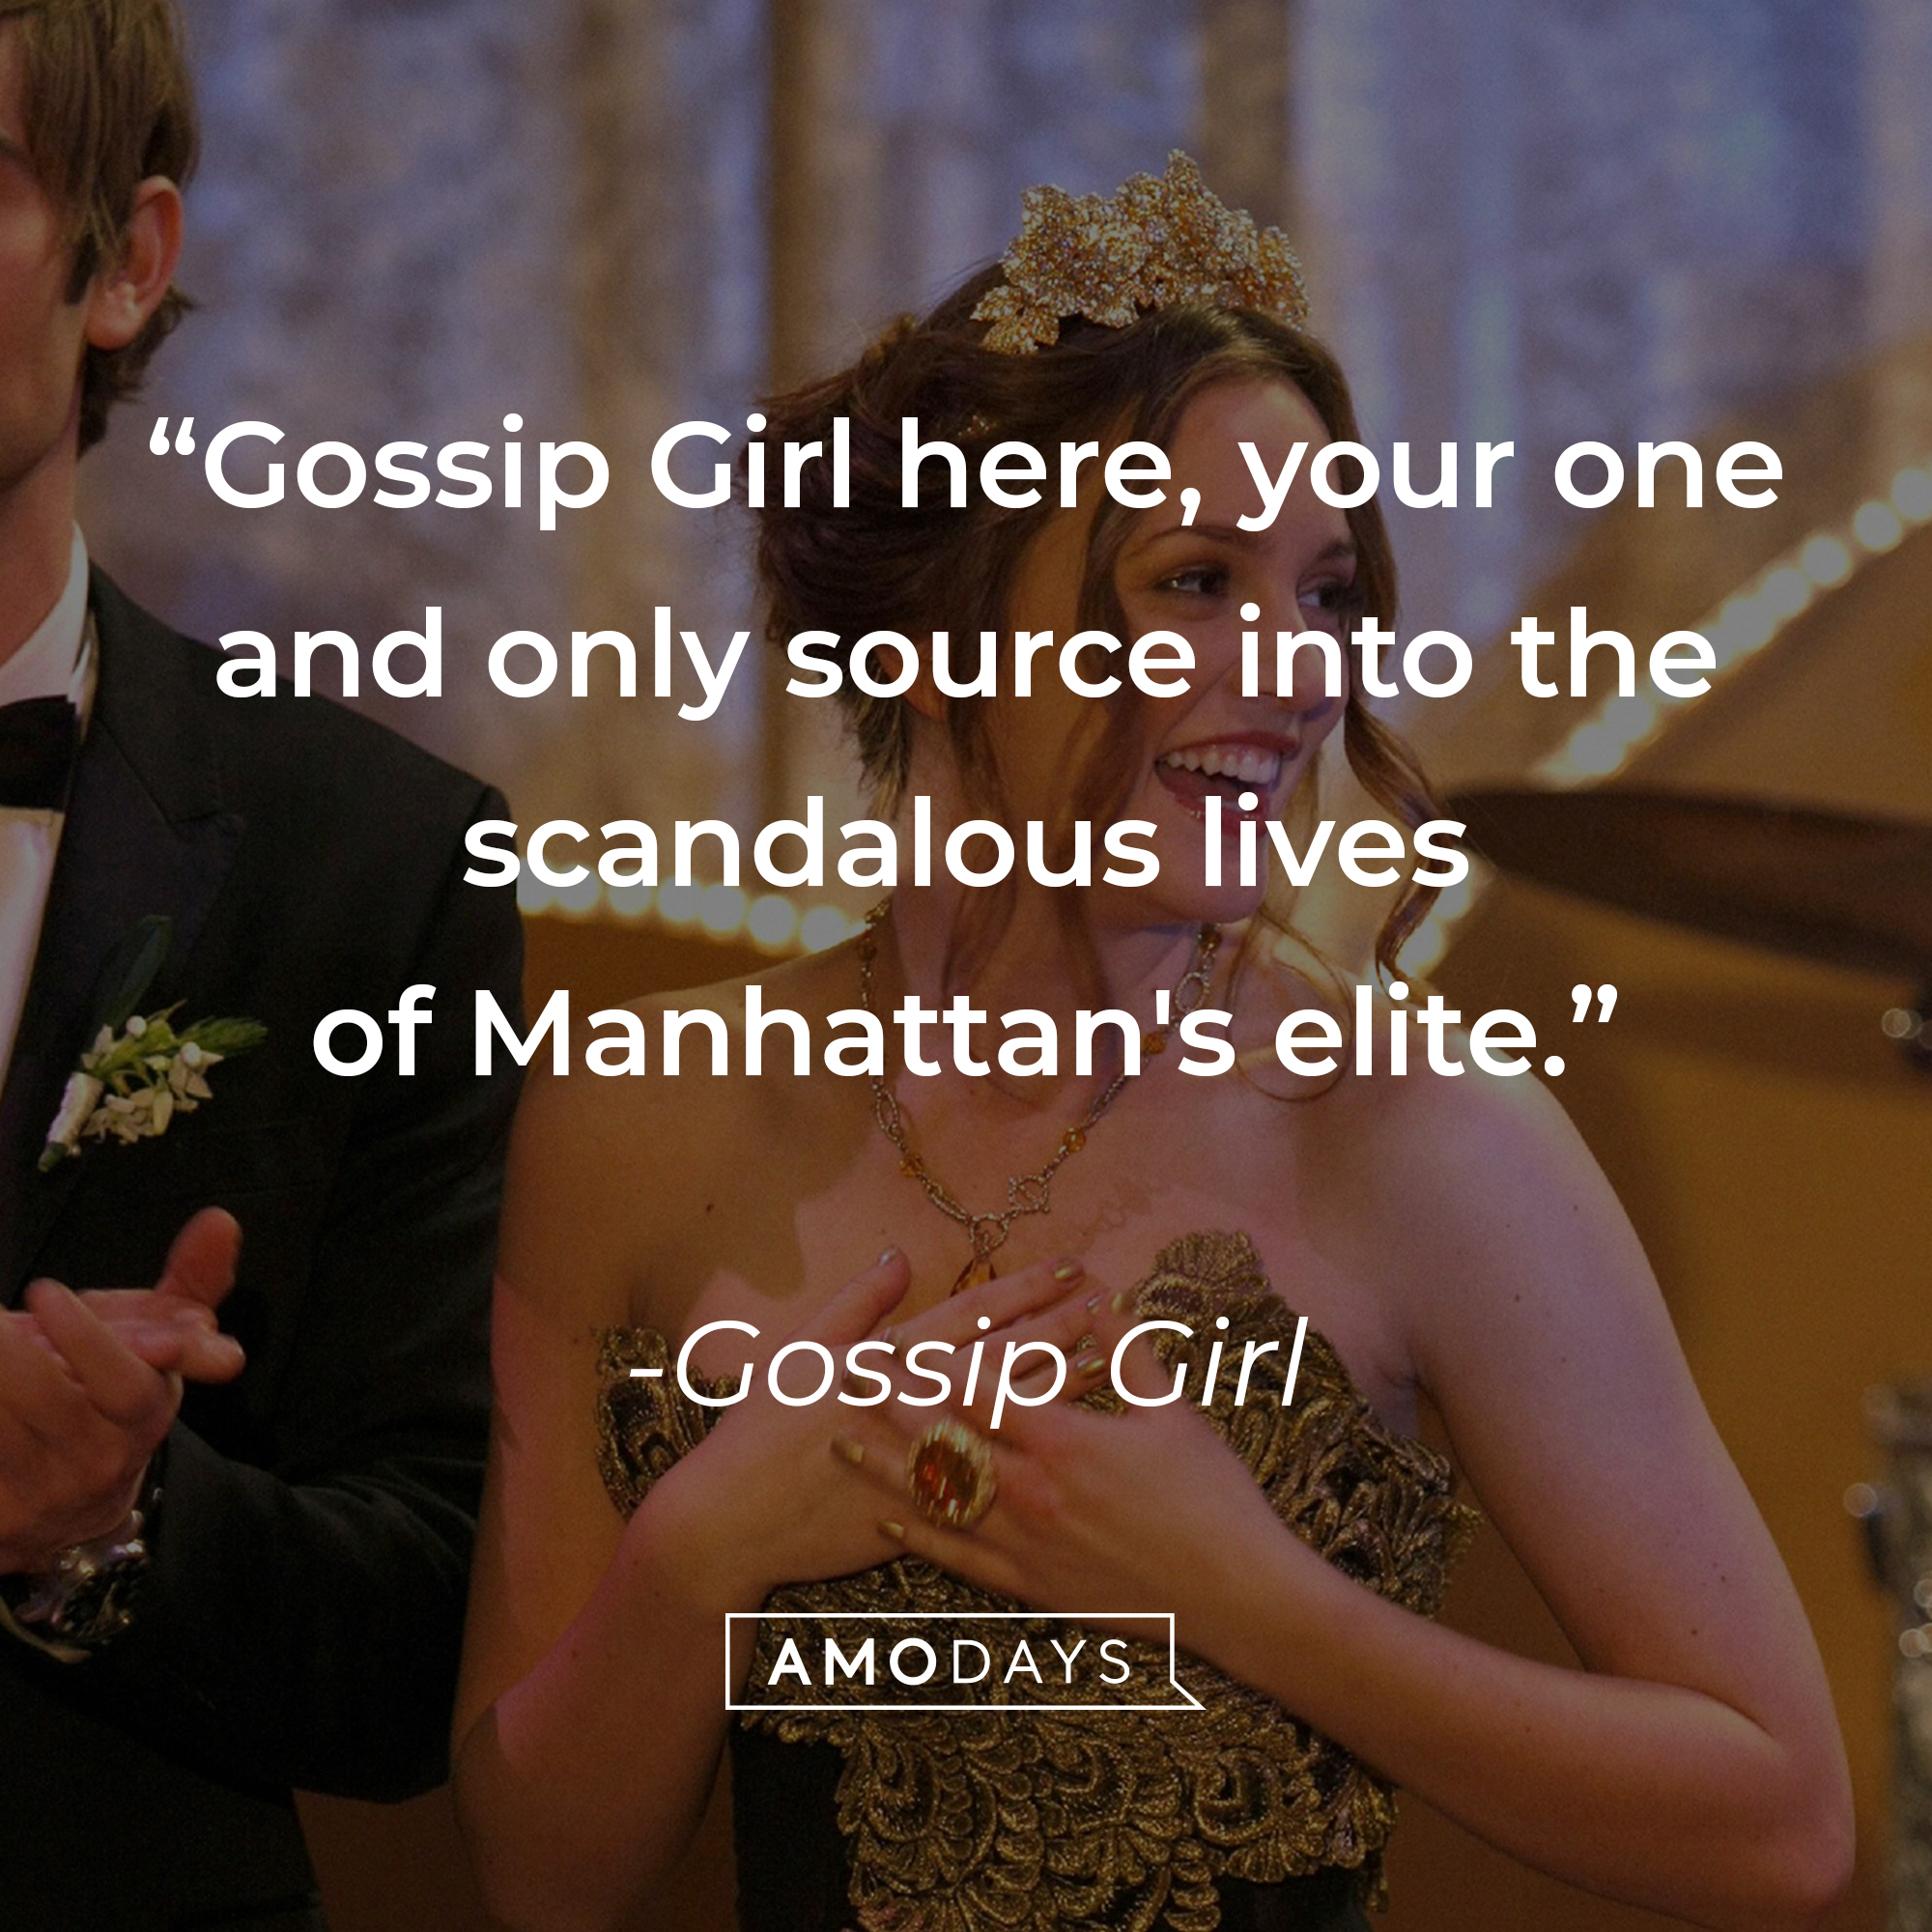 Image from "Gossip Girl" with the quote: "Gossip Girl here, your one and only source into the scandalous lives of Manhattan's elite." | Source: facebook.com/GossipGirl